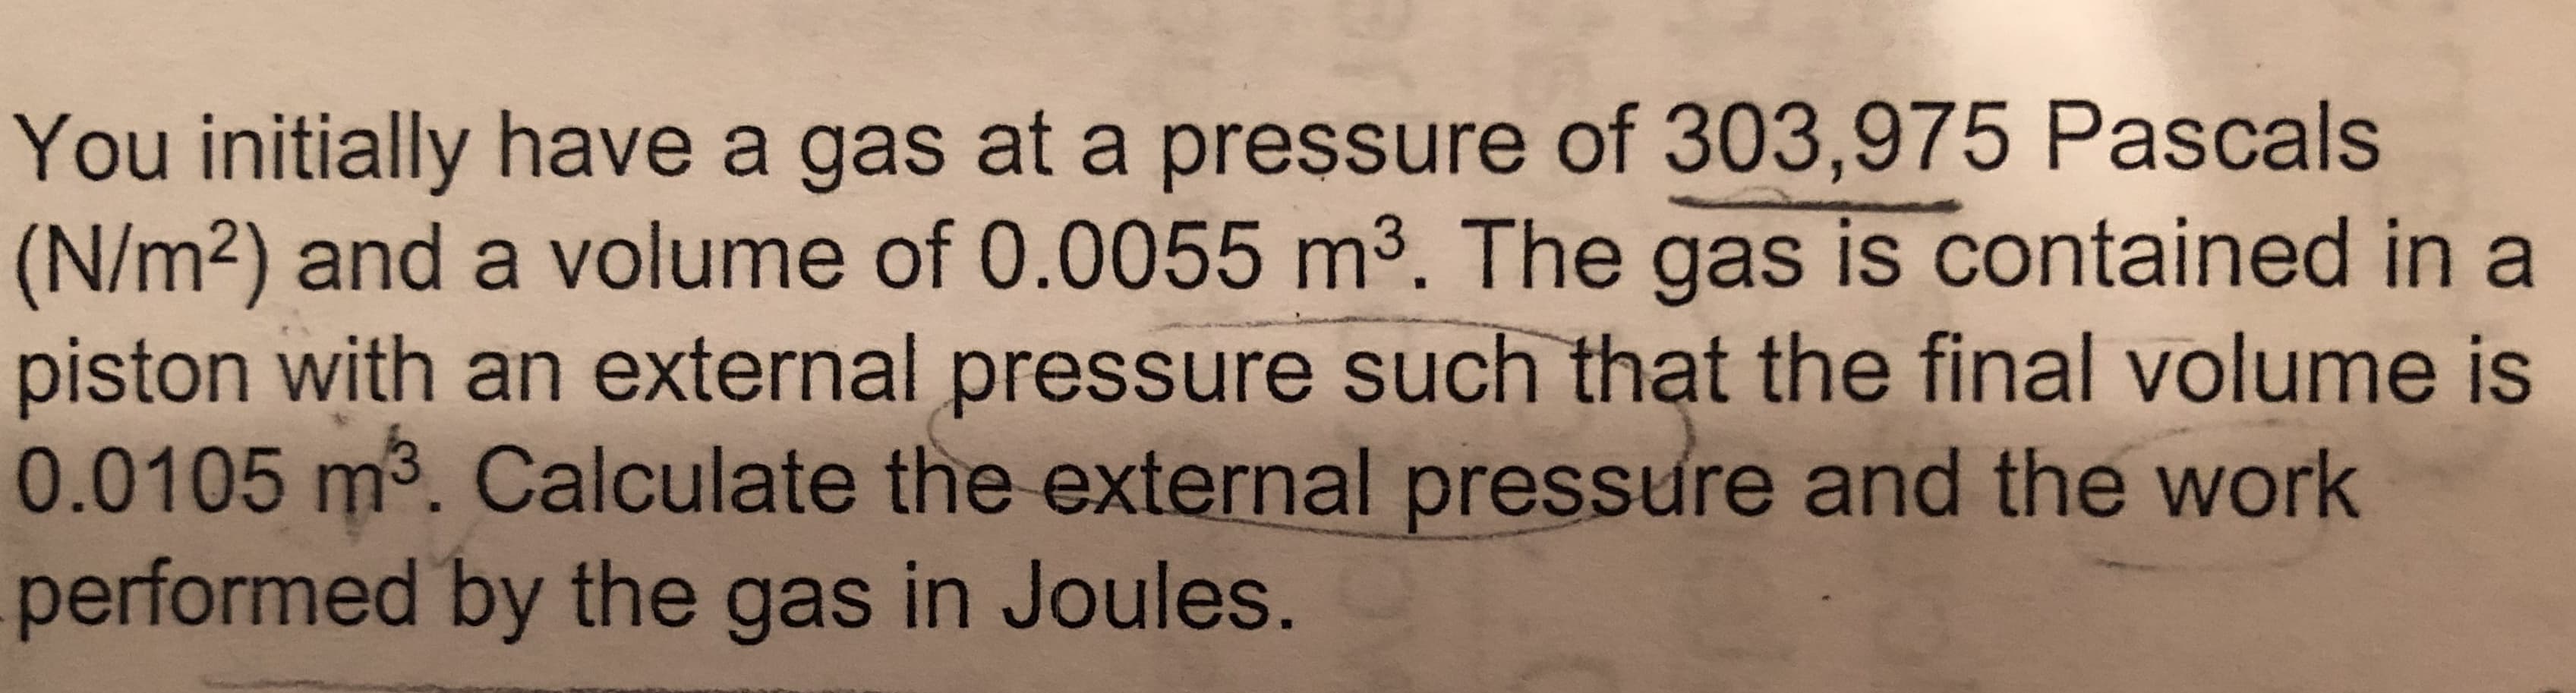 You initially have a gas at a pressure of 303,975 Pascals
(N/m2) and a volume of 0.0055 m³. The gas is contained in a
piston with an external pressure such that the final volume is
0.0105 m3. Calculate the external pressure and the work
performed by the gas in Joules.
